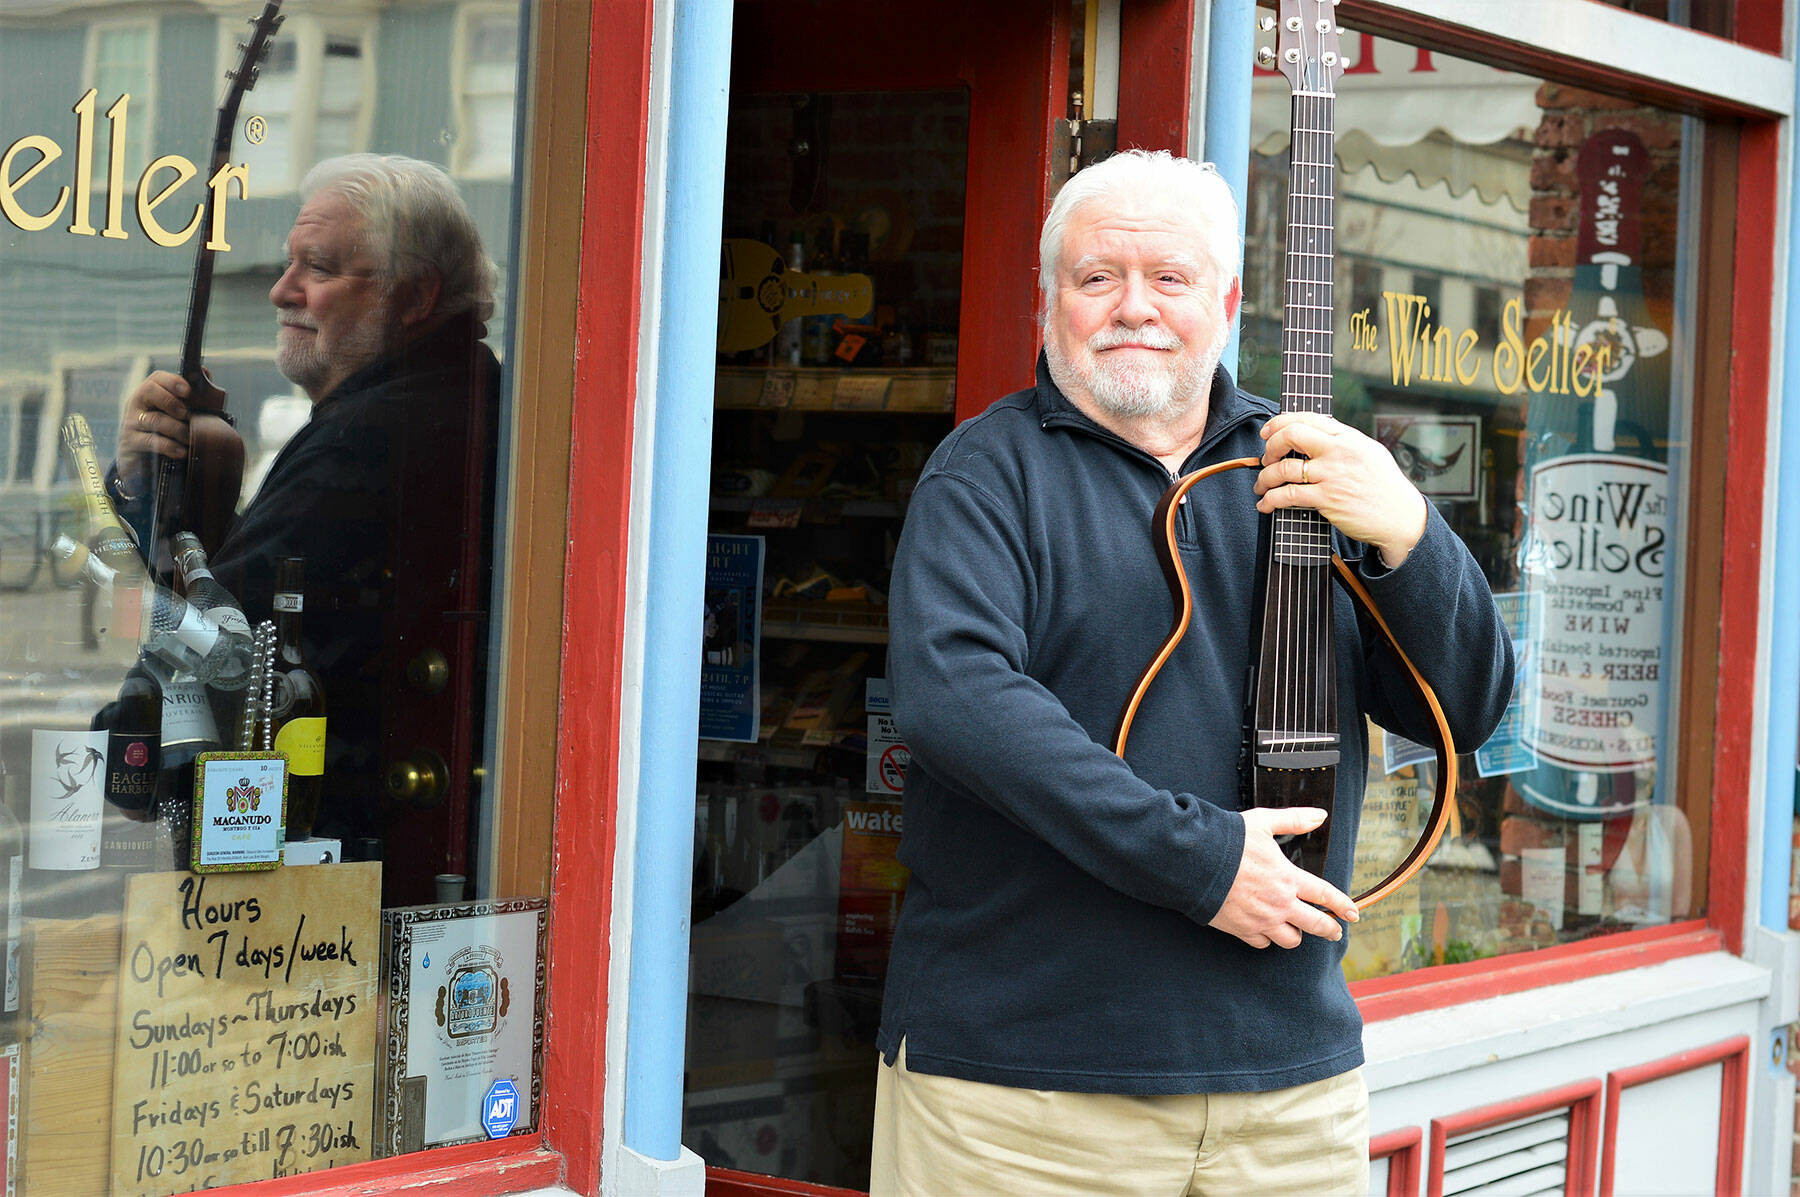 Guitarist Joe Euro, aka the Wine Seller of downtown Port Townsend, will give this Thursday’s Candlelight Concert in person at Trinity United Methodist Church. Proceeds will benefit Bayside Housing & Services. (Diane Urbani de la Paz/Peninsula Daily News)